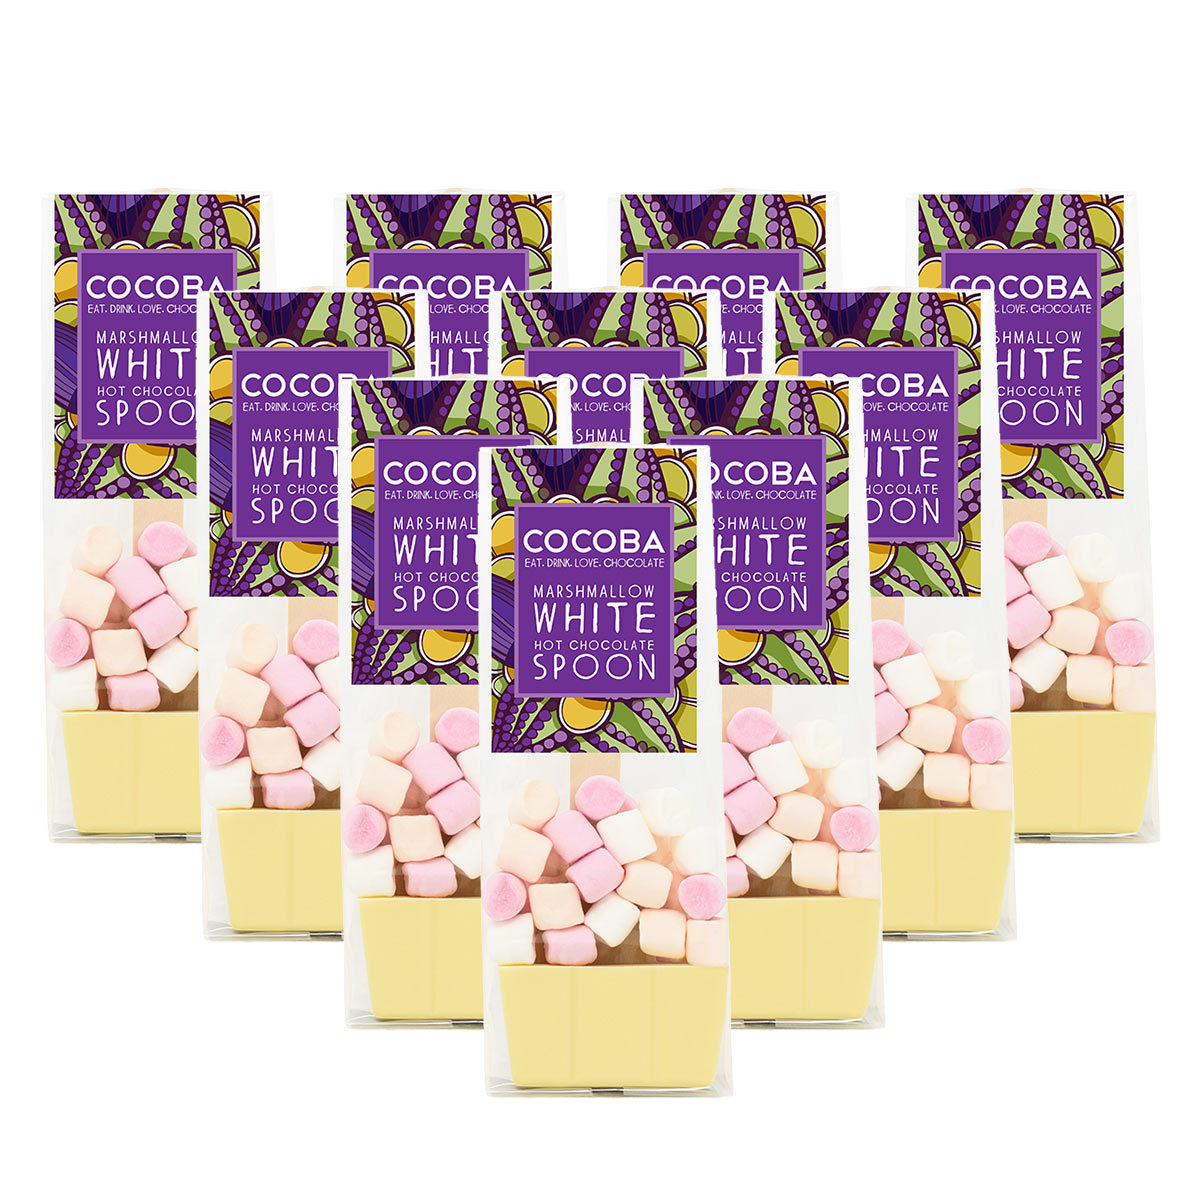 Cocoba White Chocolate Hot Chocolate Spoons with Marshmallows, 20 x 50g